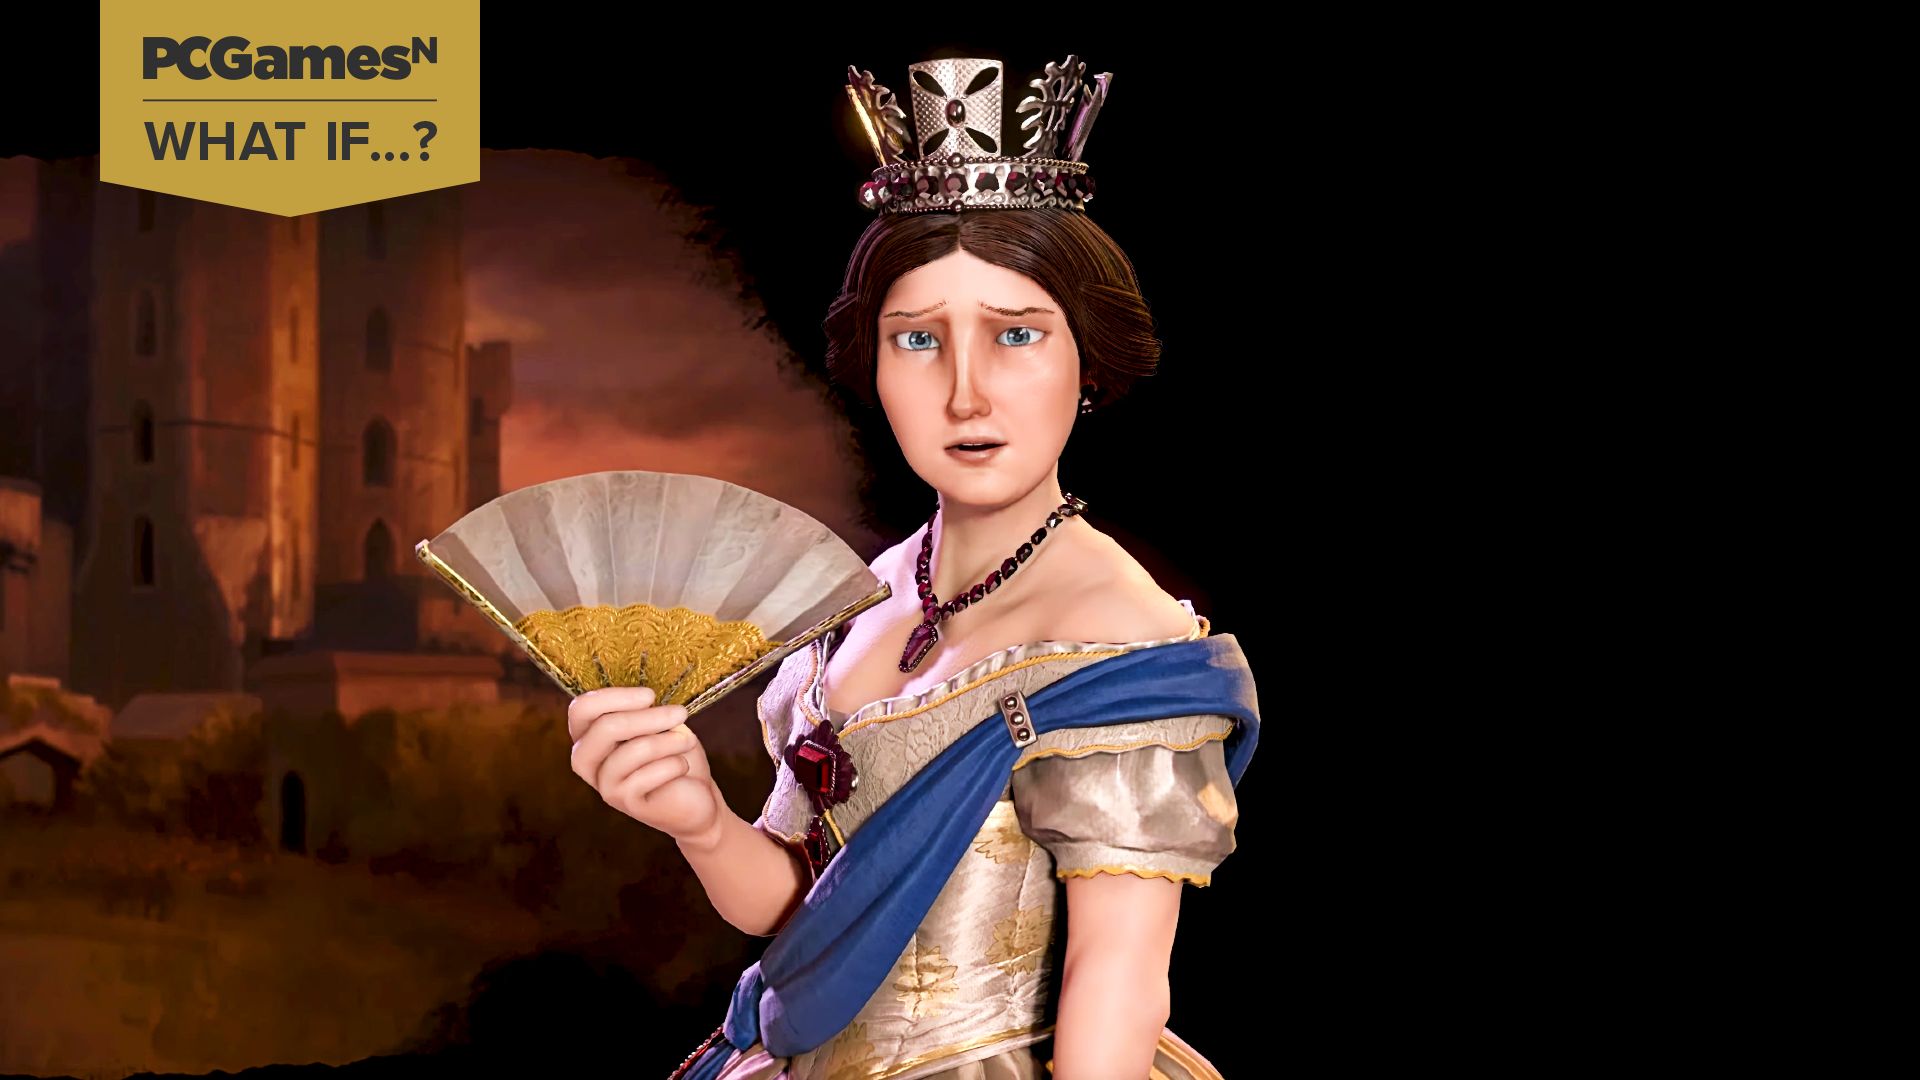 What if: strategy games like Civilization 6 had proper co-op?